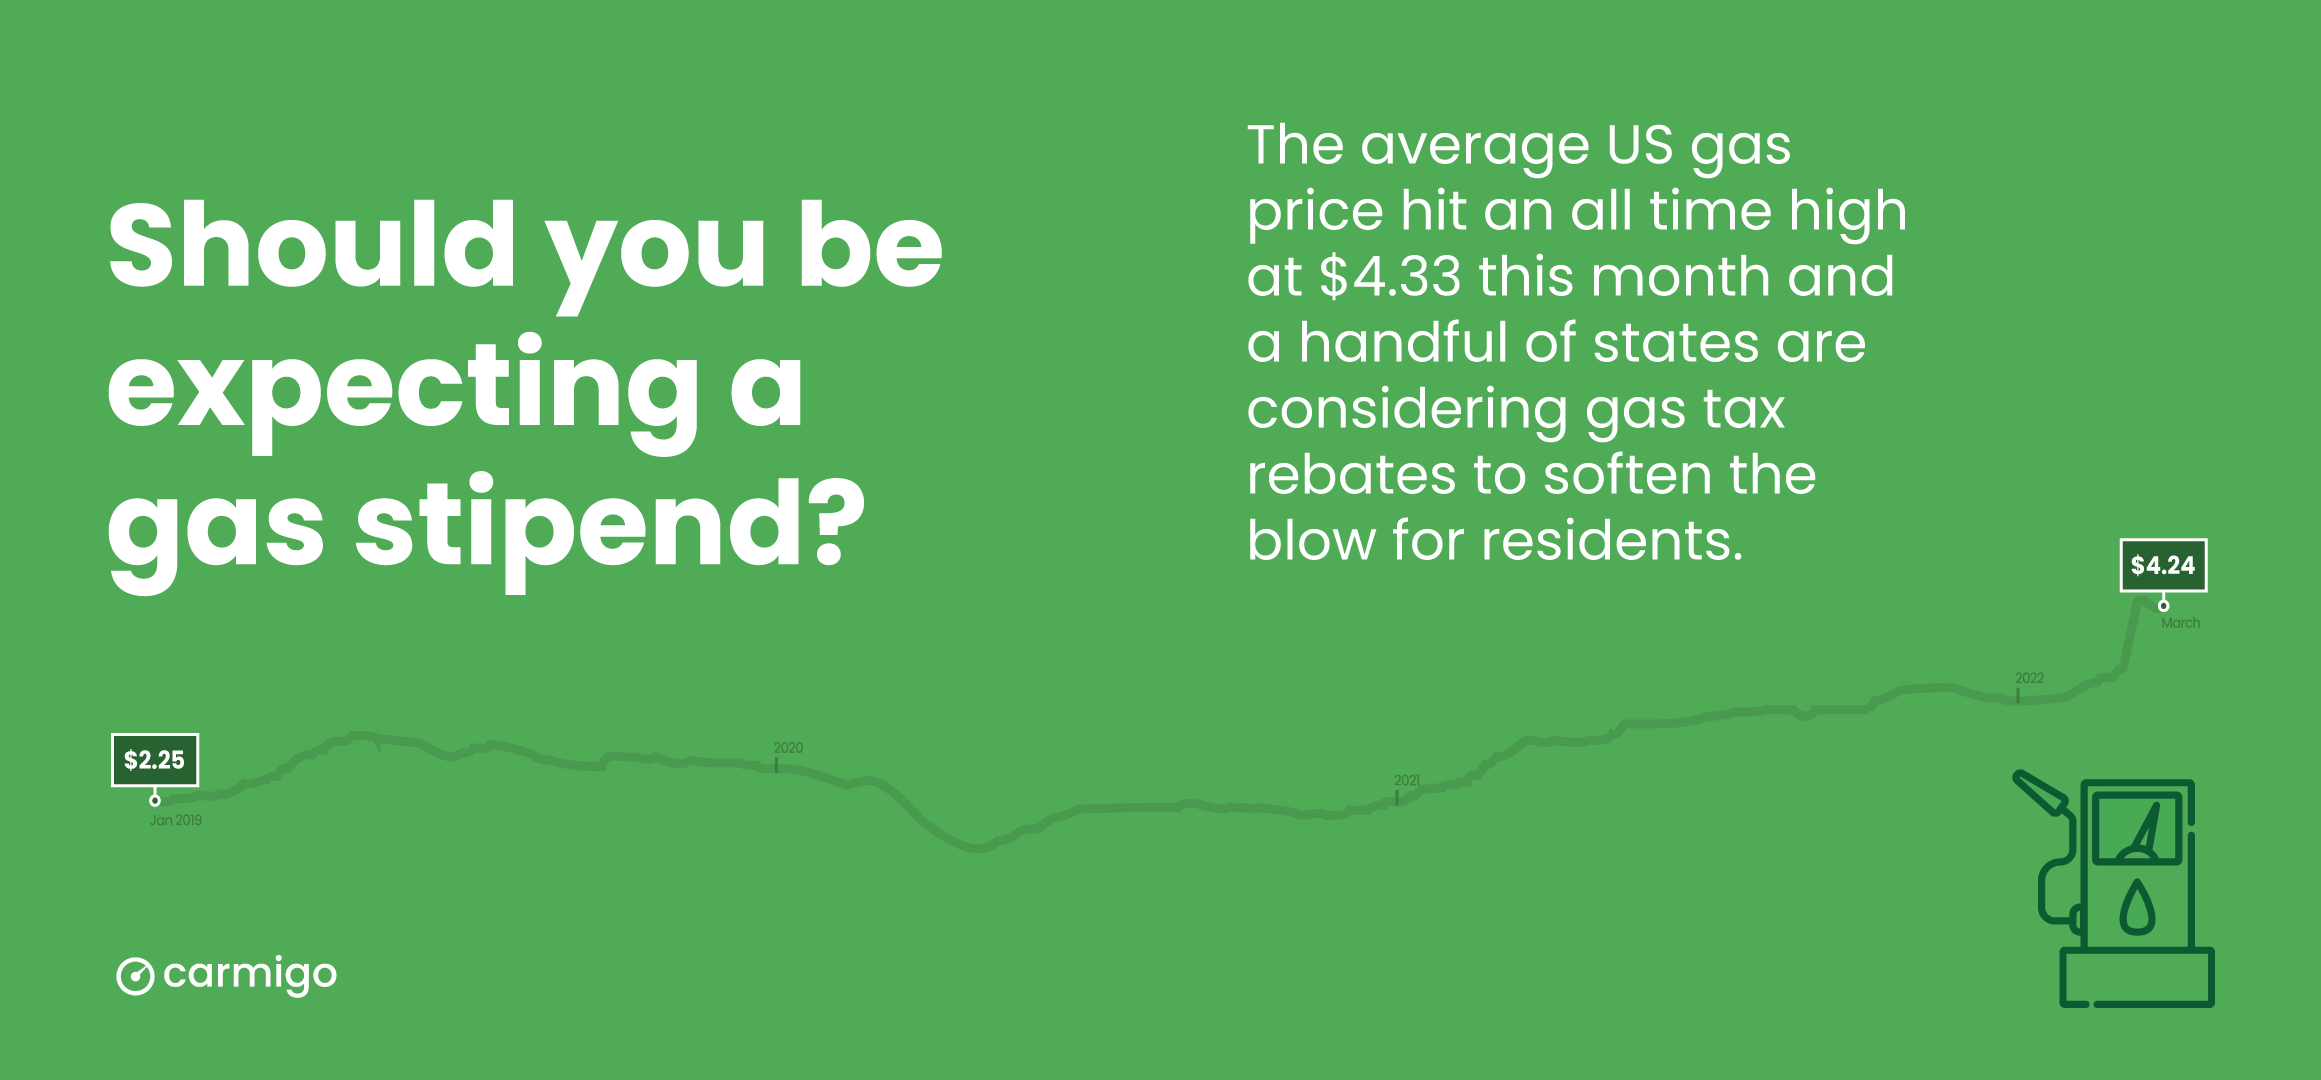 Should you be expecting a gas stipend? The average US gas price hi an all-time high at $4.33 this month and a handful of states are considering gas tax rebates to soften the blow for residents.